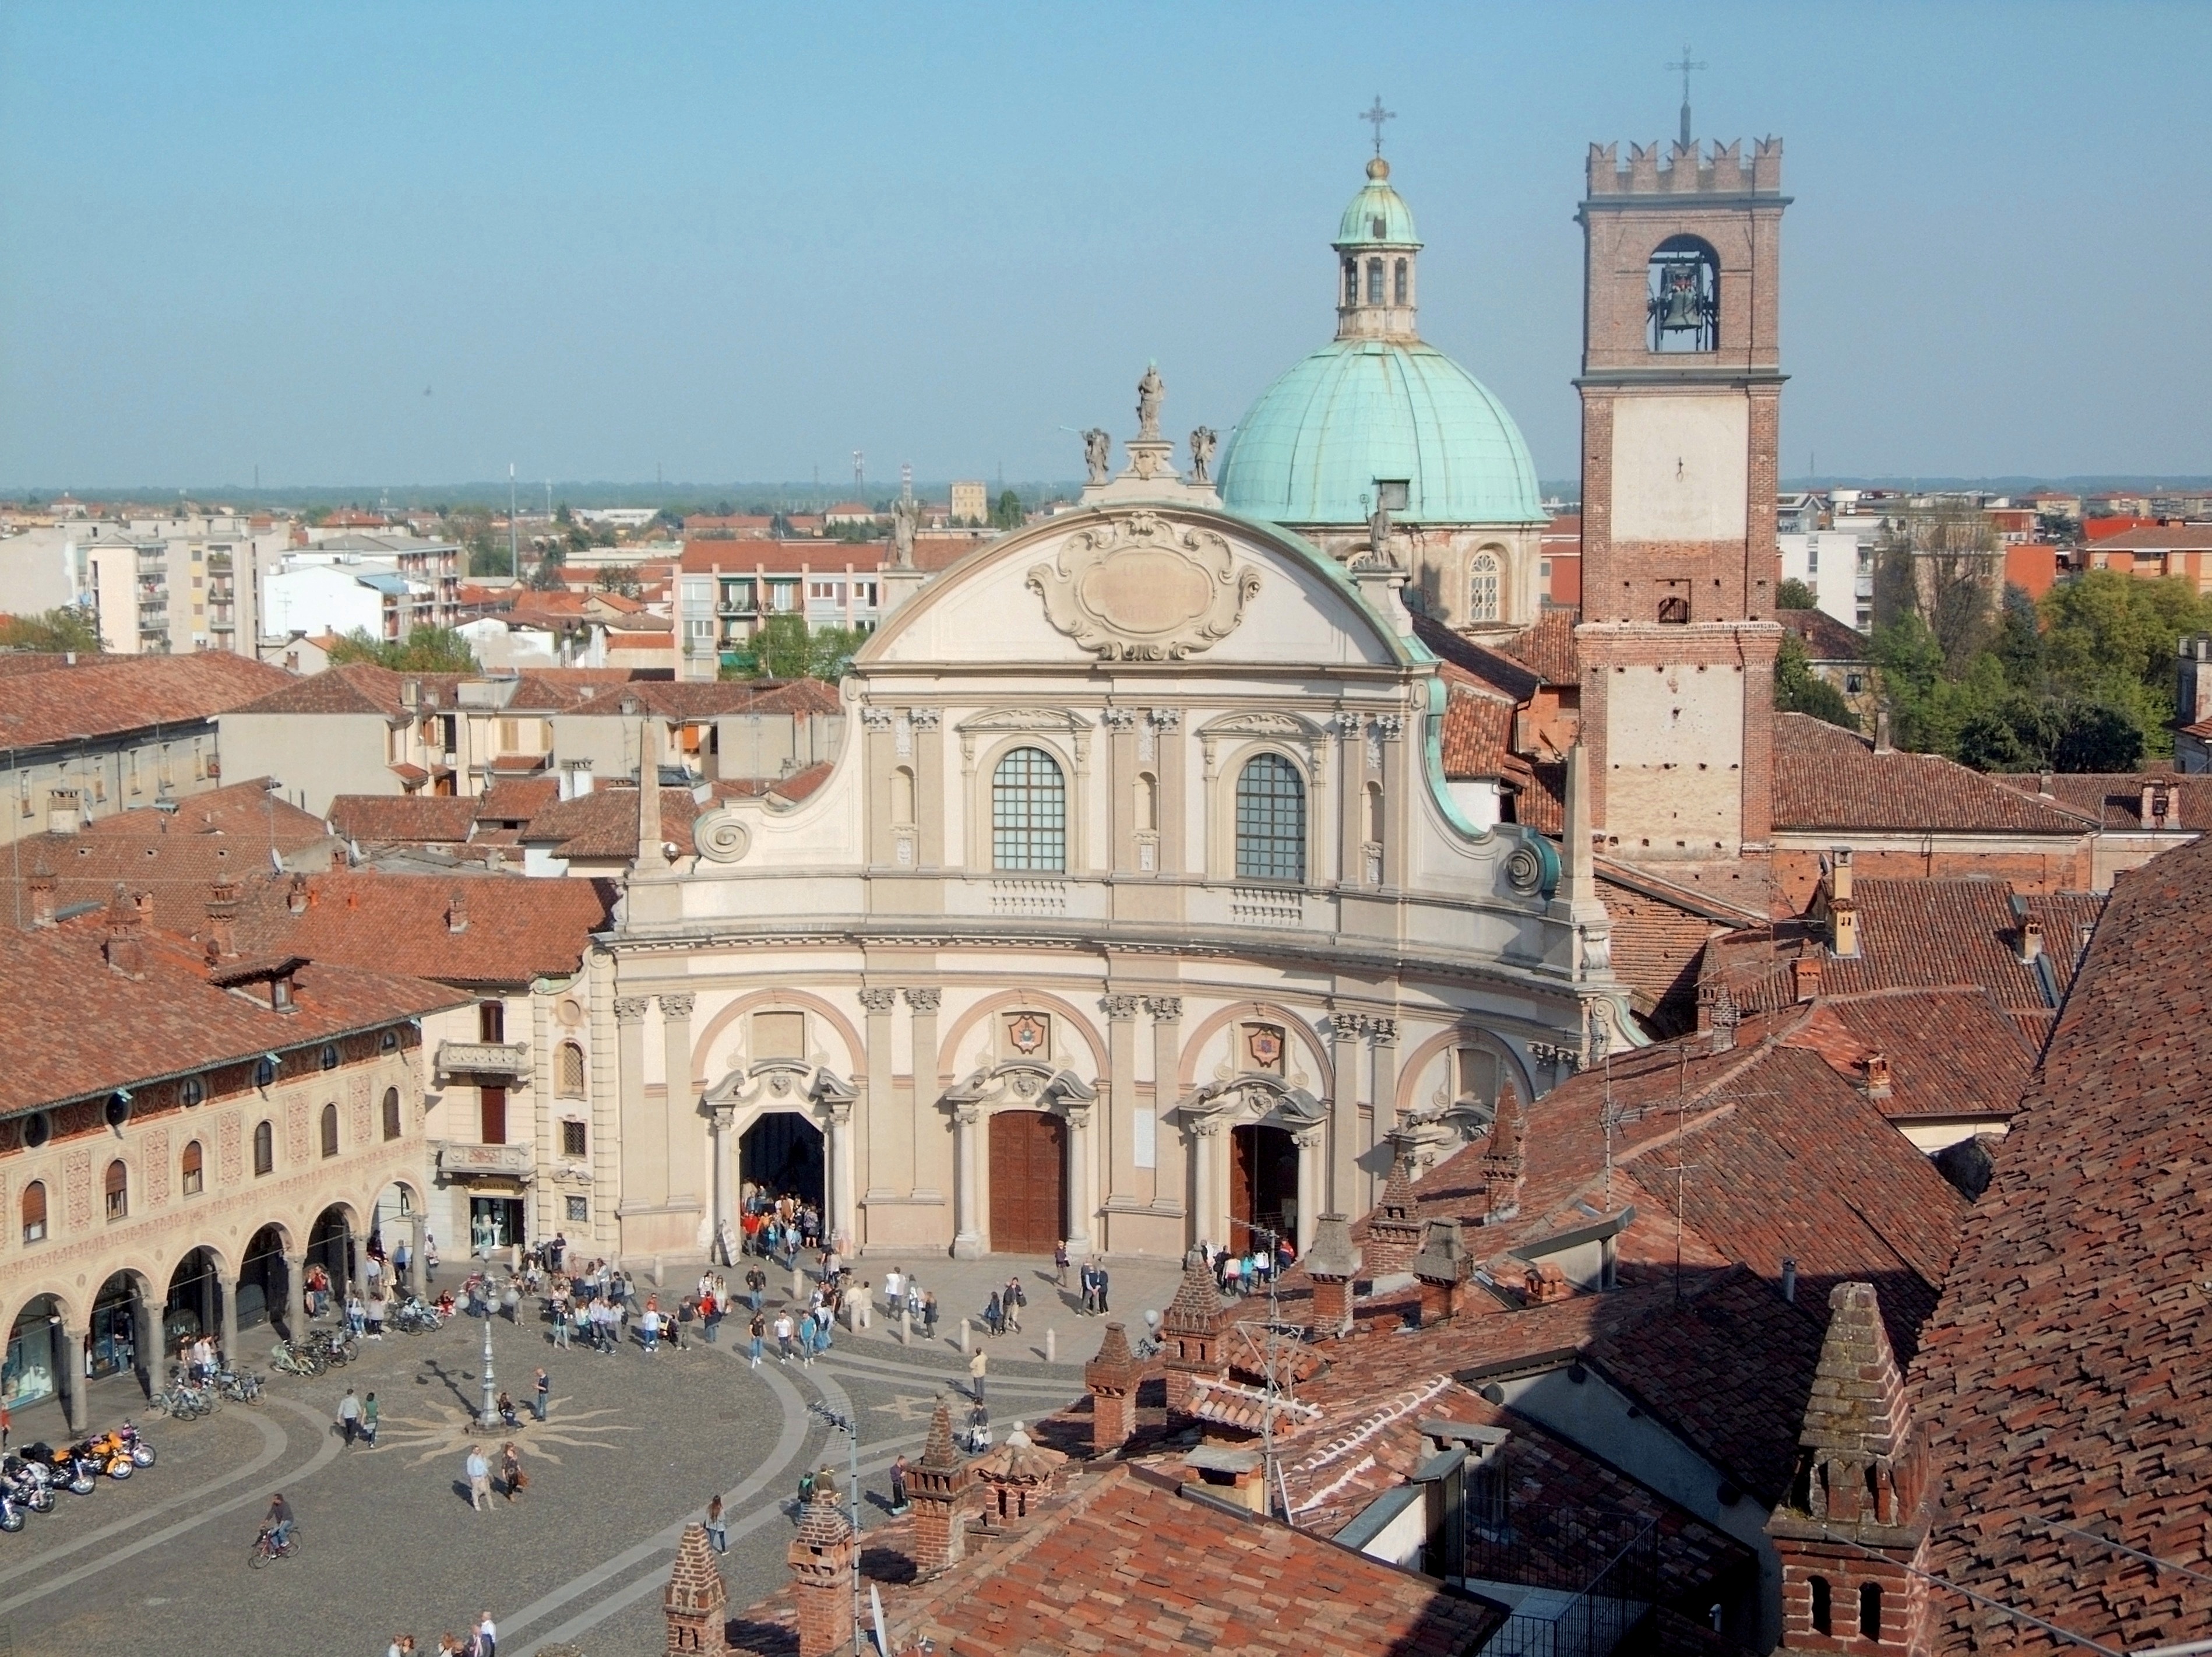 Vigevano (Pavia, Italy): Duomo and part of the square, seen fro the tower of the castle - Vigevano (Pavia, Italy)